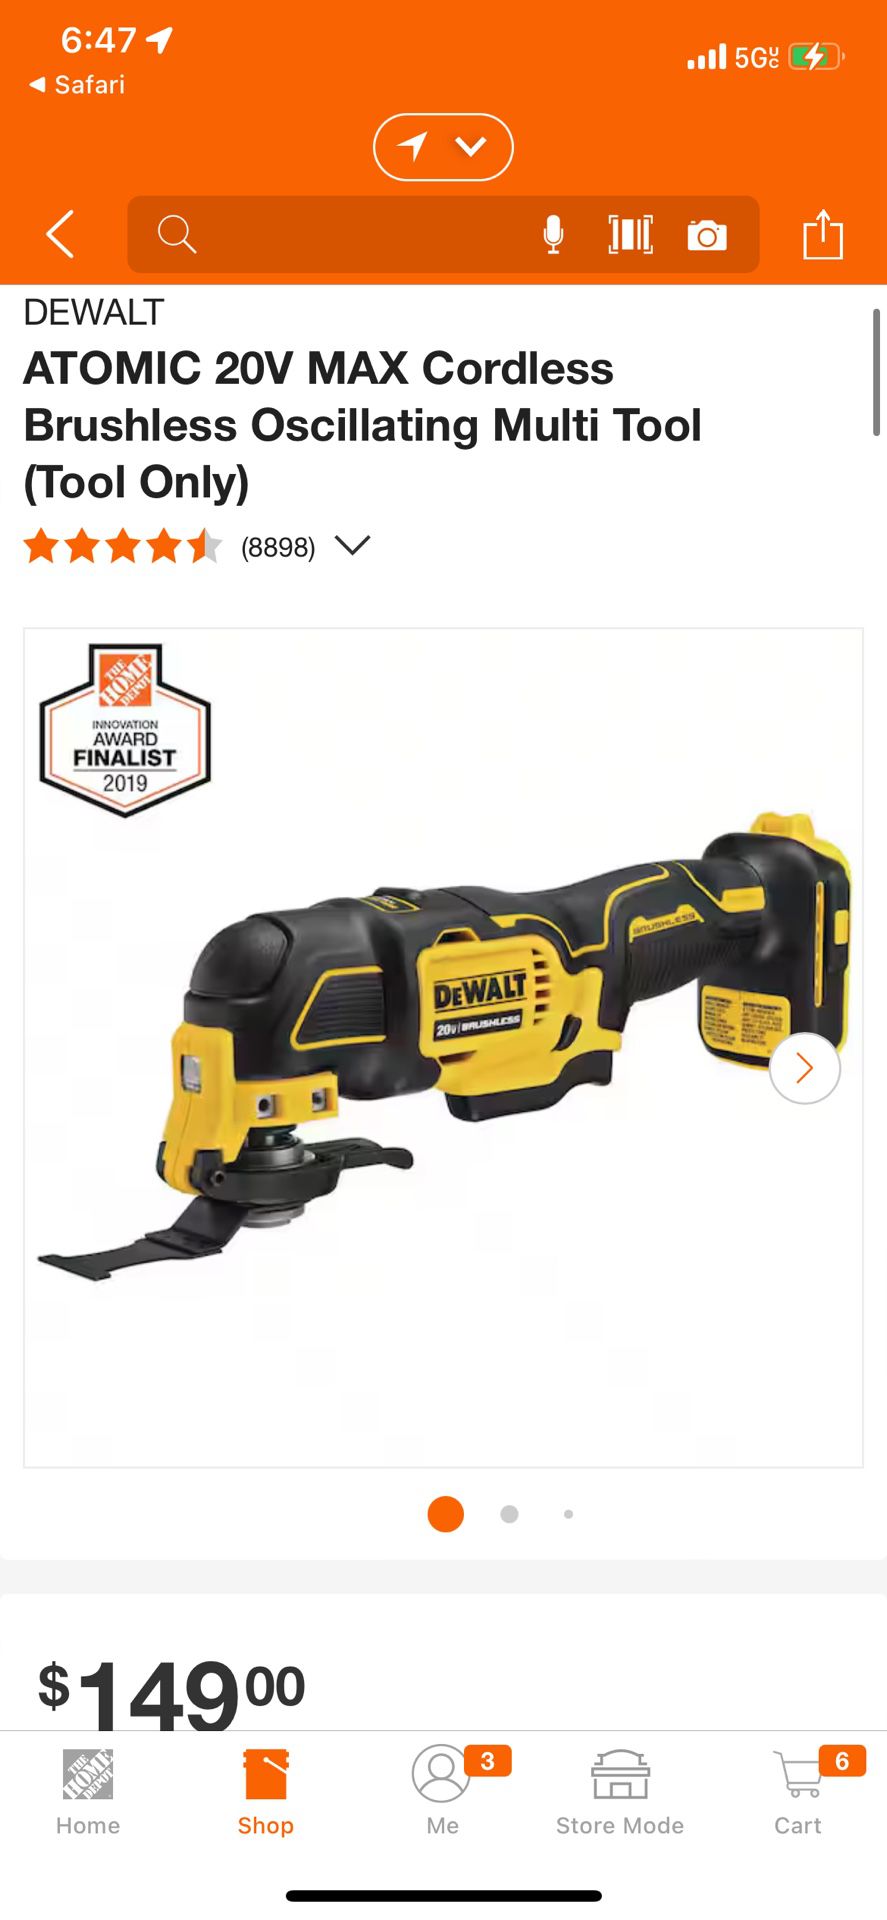 DEWALT ATOMIC 20V MAX Cordless Brushless Oscillating Multi Tool (Tool Only)  About This Product This 20-Volt MAX cordless oscillating multi-tool inclu